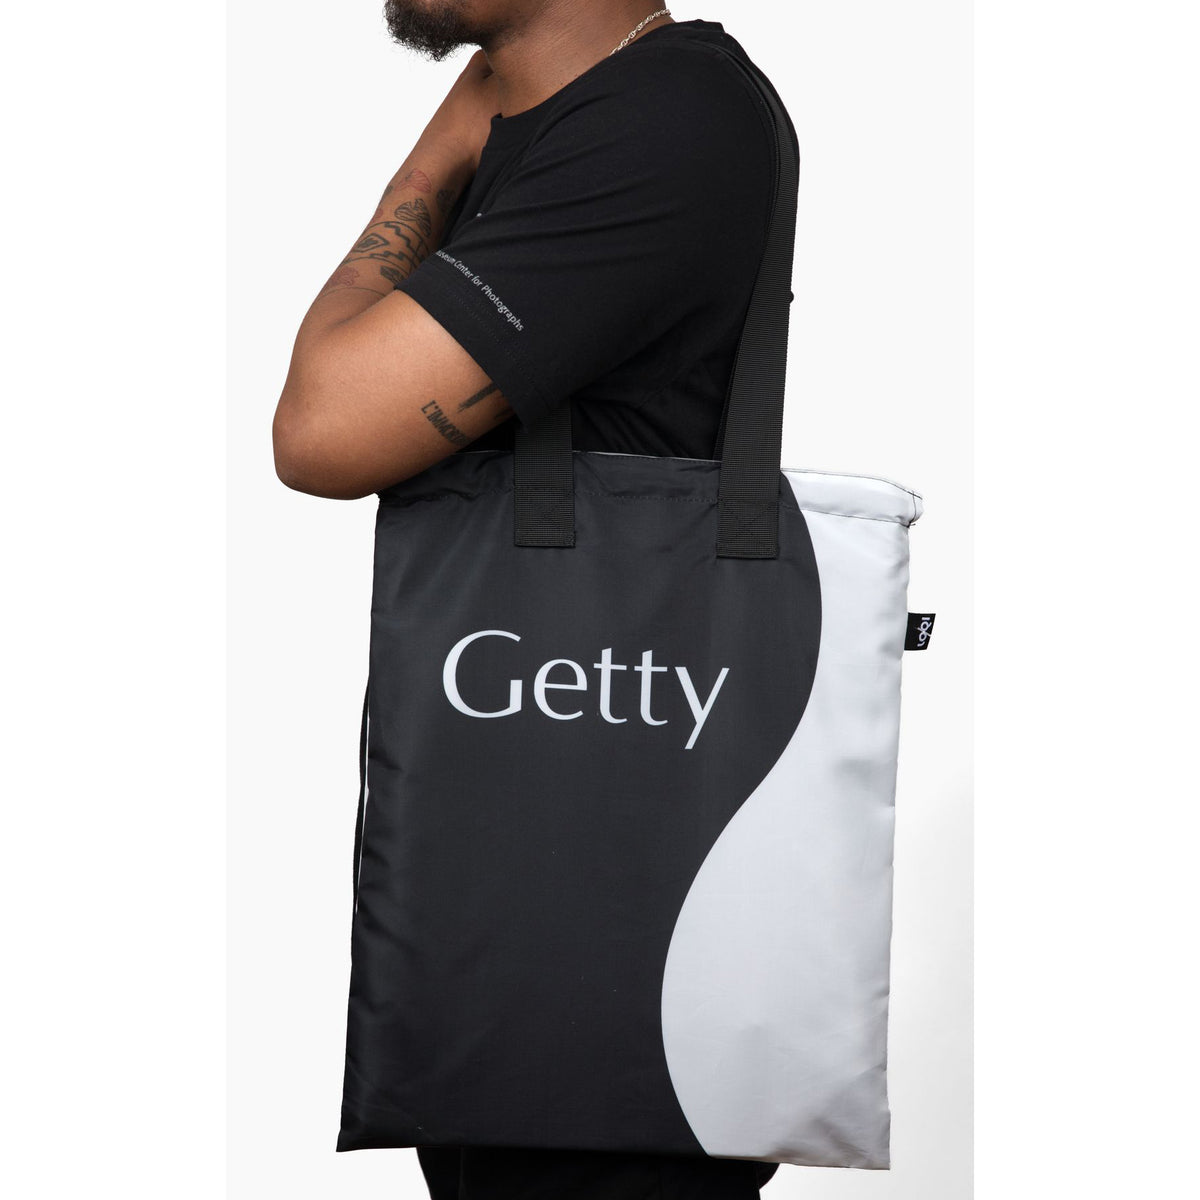 Getty Logo Reflective Reversible Tote Bag / Backpack